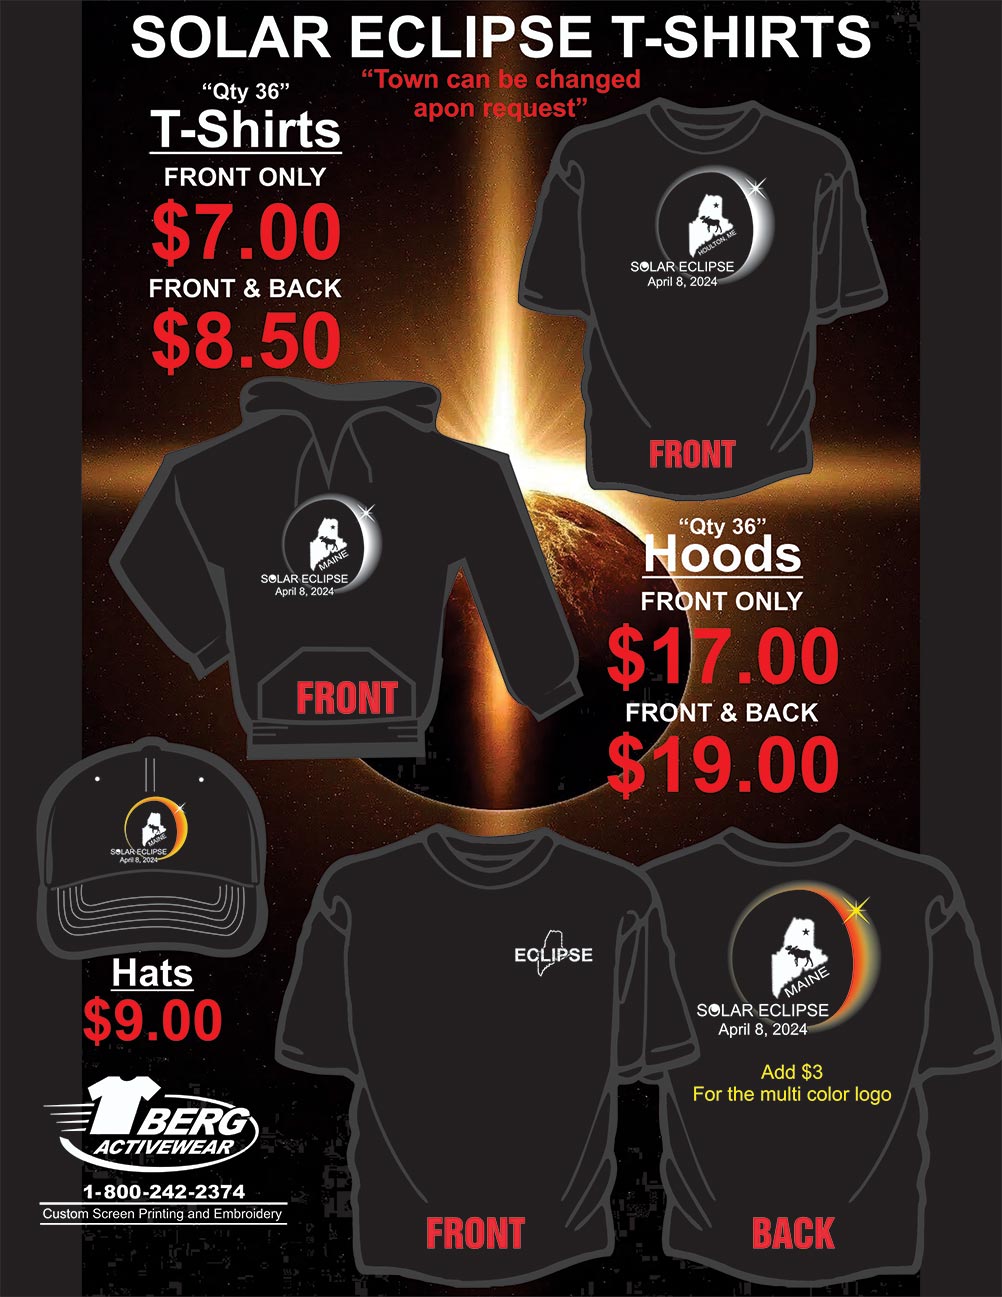 Solar Eclipes Shirts & Hoodies Available - Call for more information!